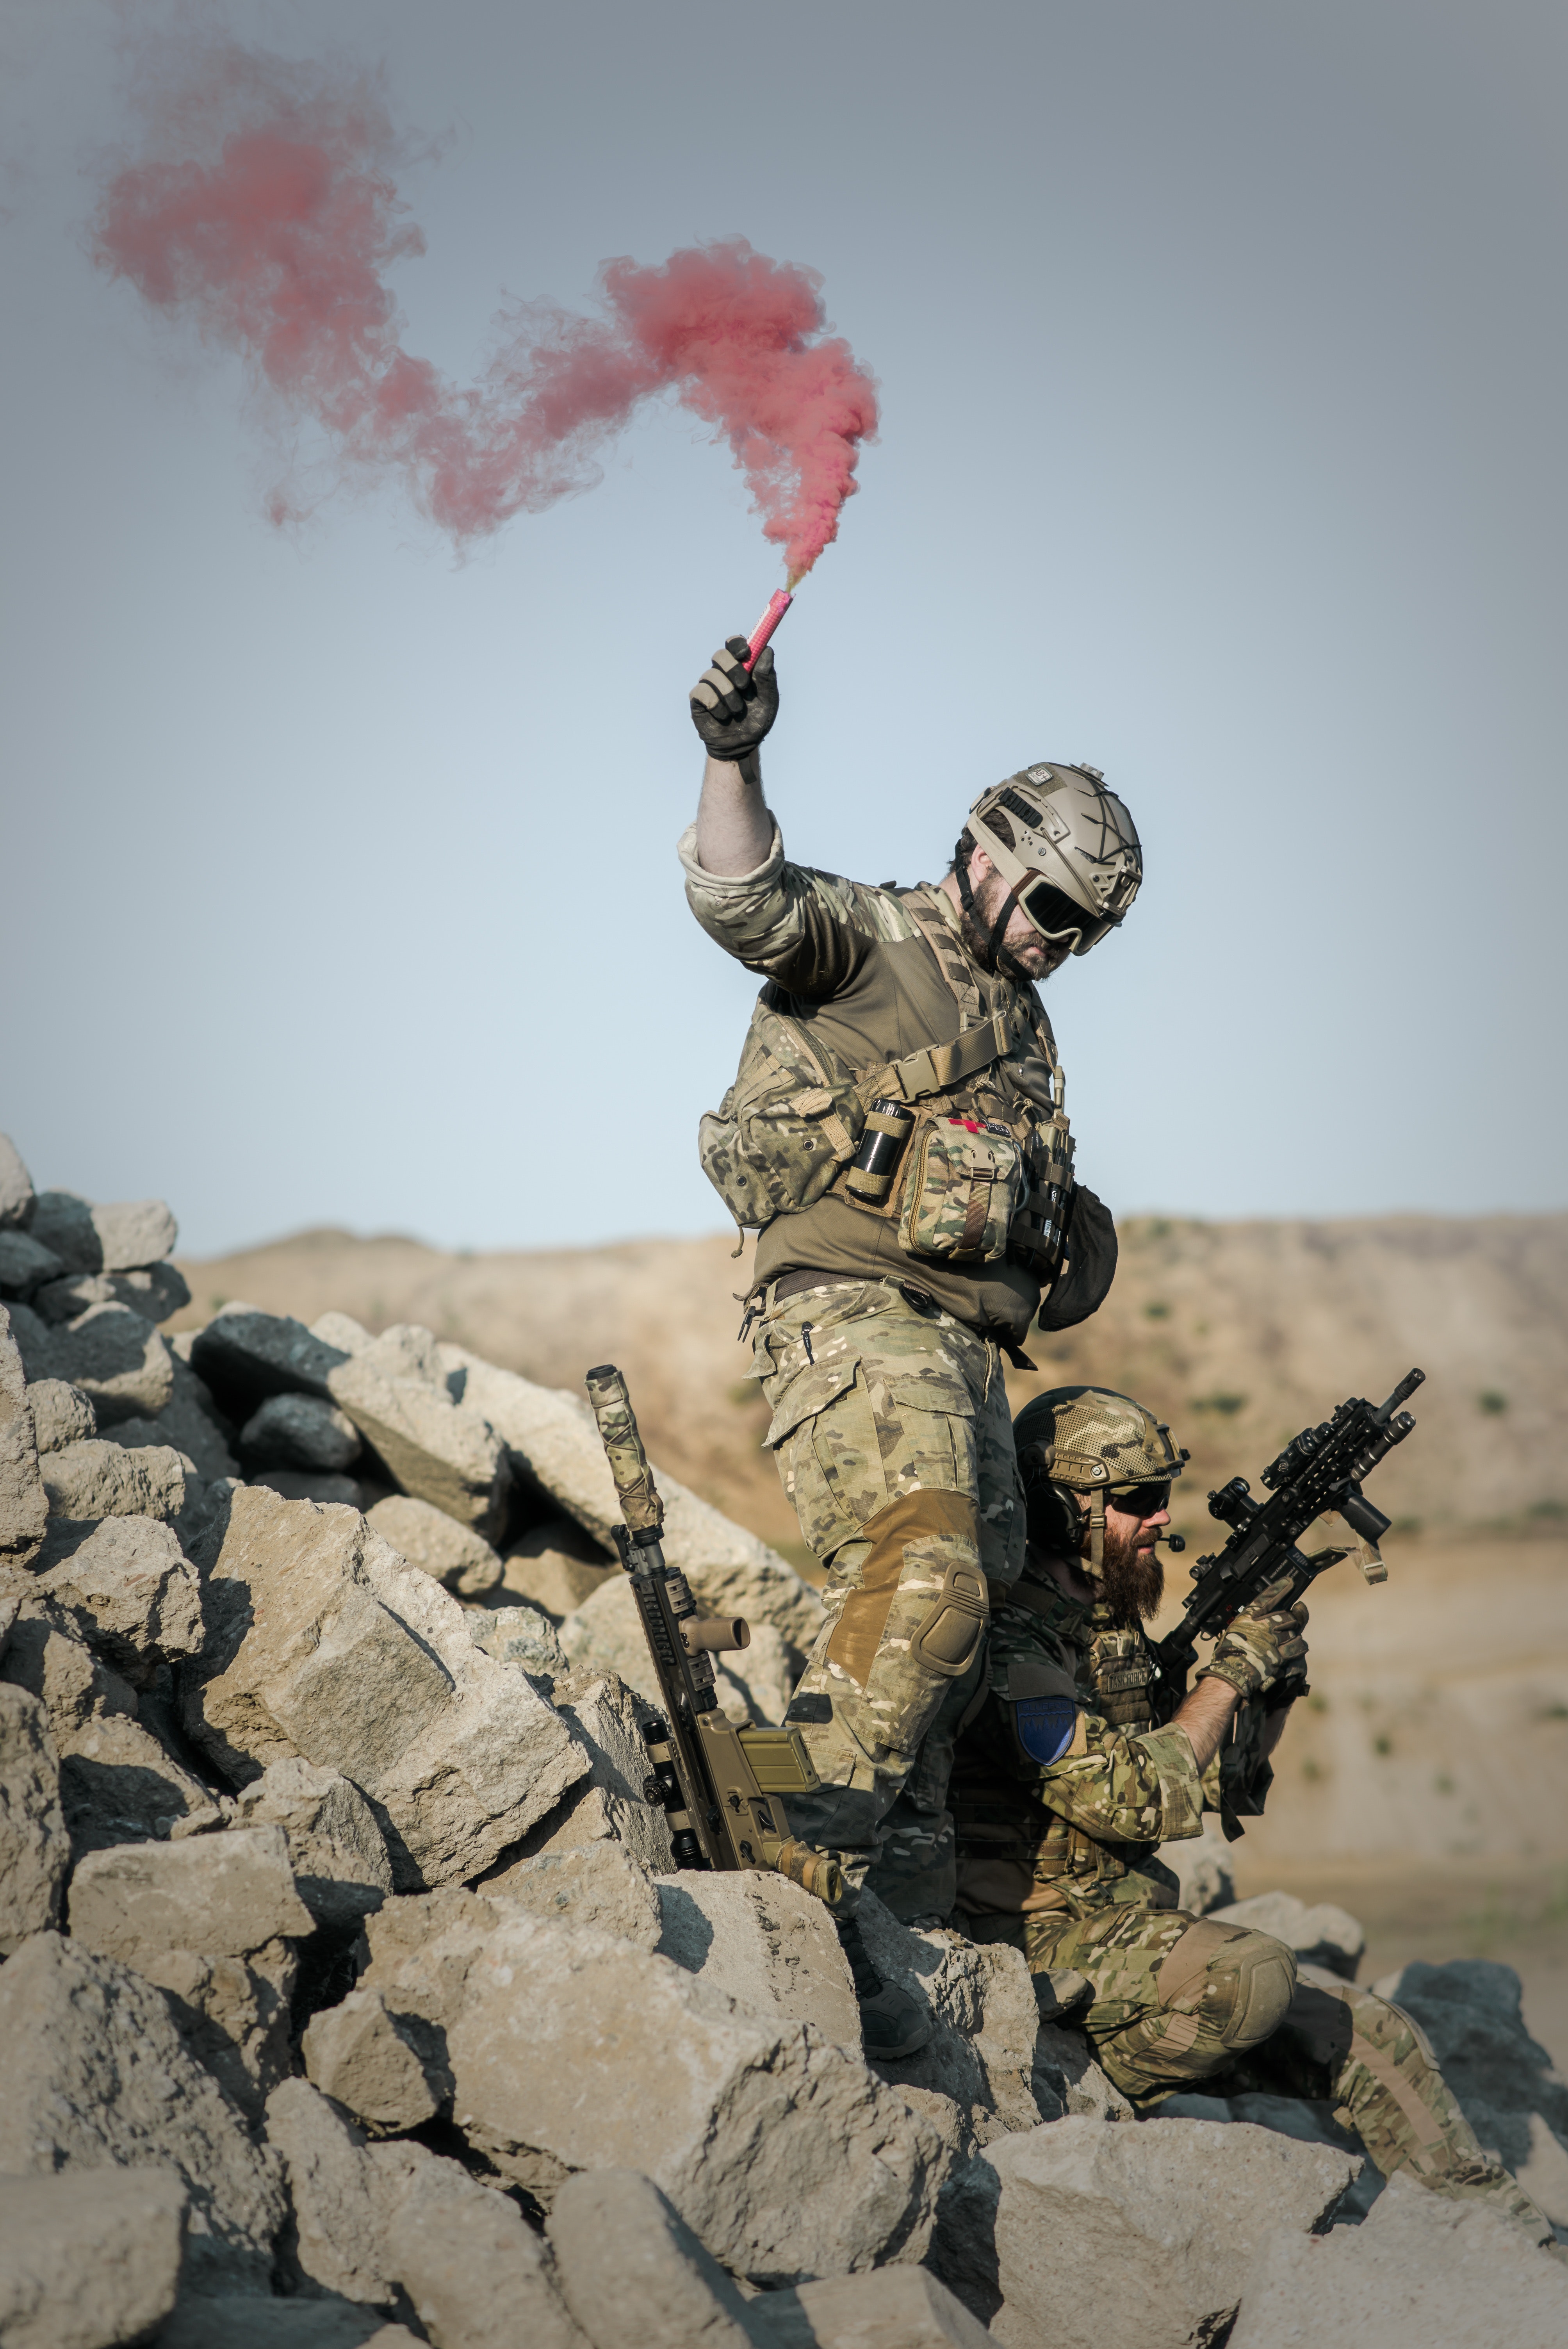 2 Soldier With Guns on Grey Pile of Rocks Holding Smoke Stick during Daytime, Police, Uniform, Team, Soldiers, HQ Photo